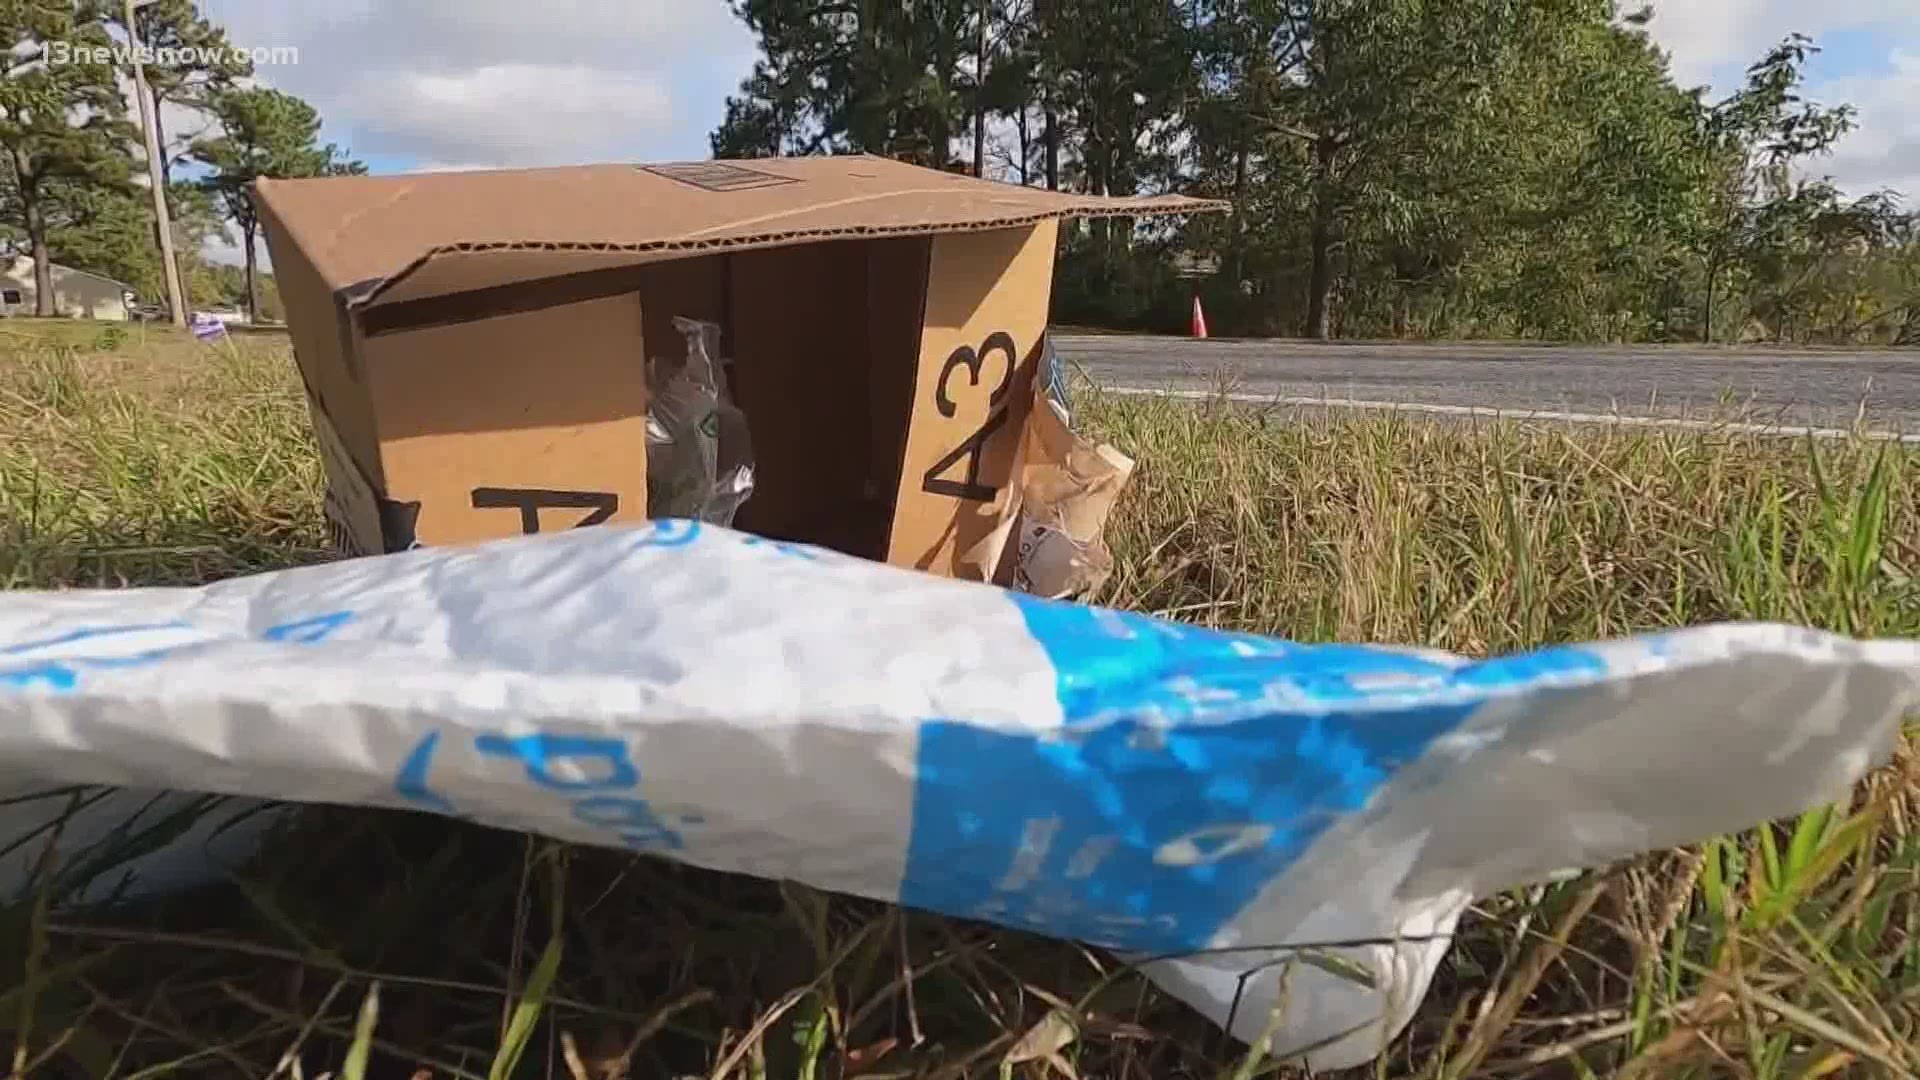 One woman said the package had registered as "delivered" in the system, but didn't arrive with her other boxes. Amazon said it's conducting an investigation.